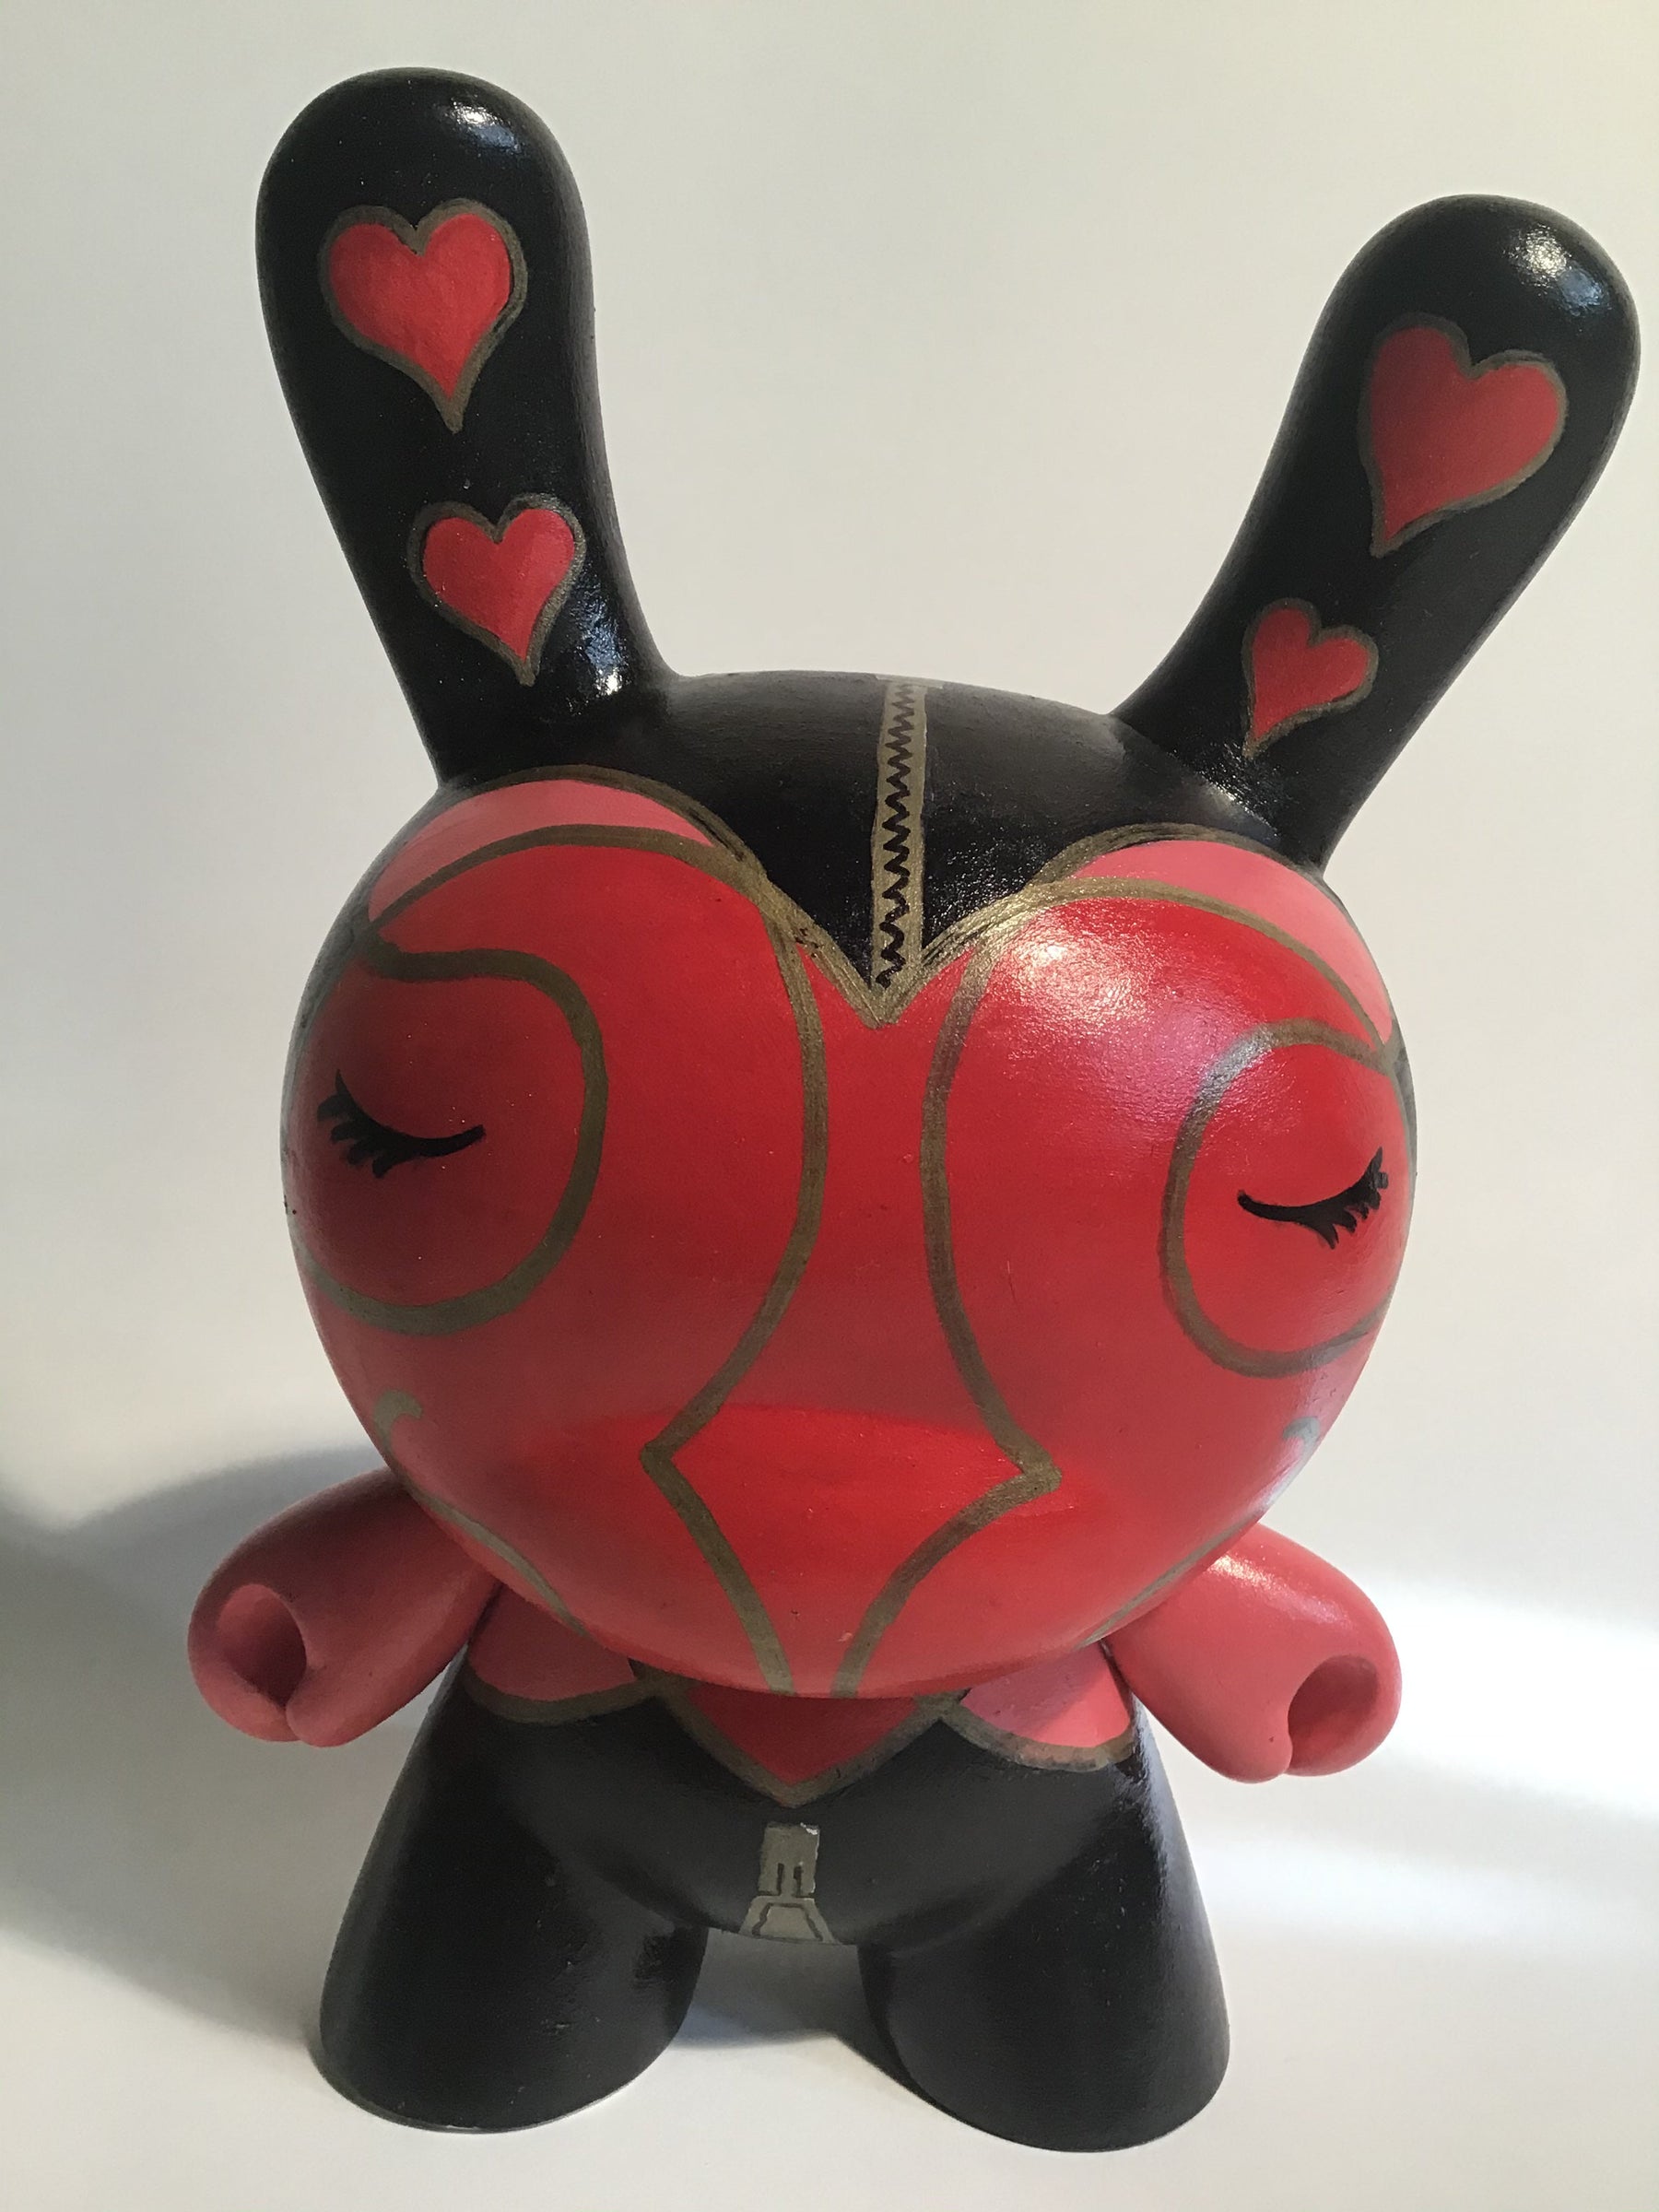 My Dunny Valentine custom 8-inch Dunny by KaMo Available Now ! ! !